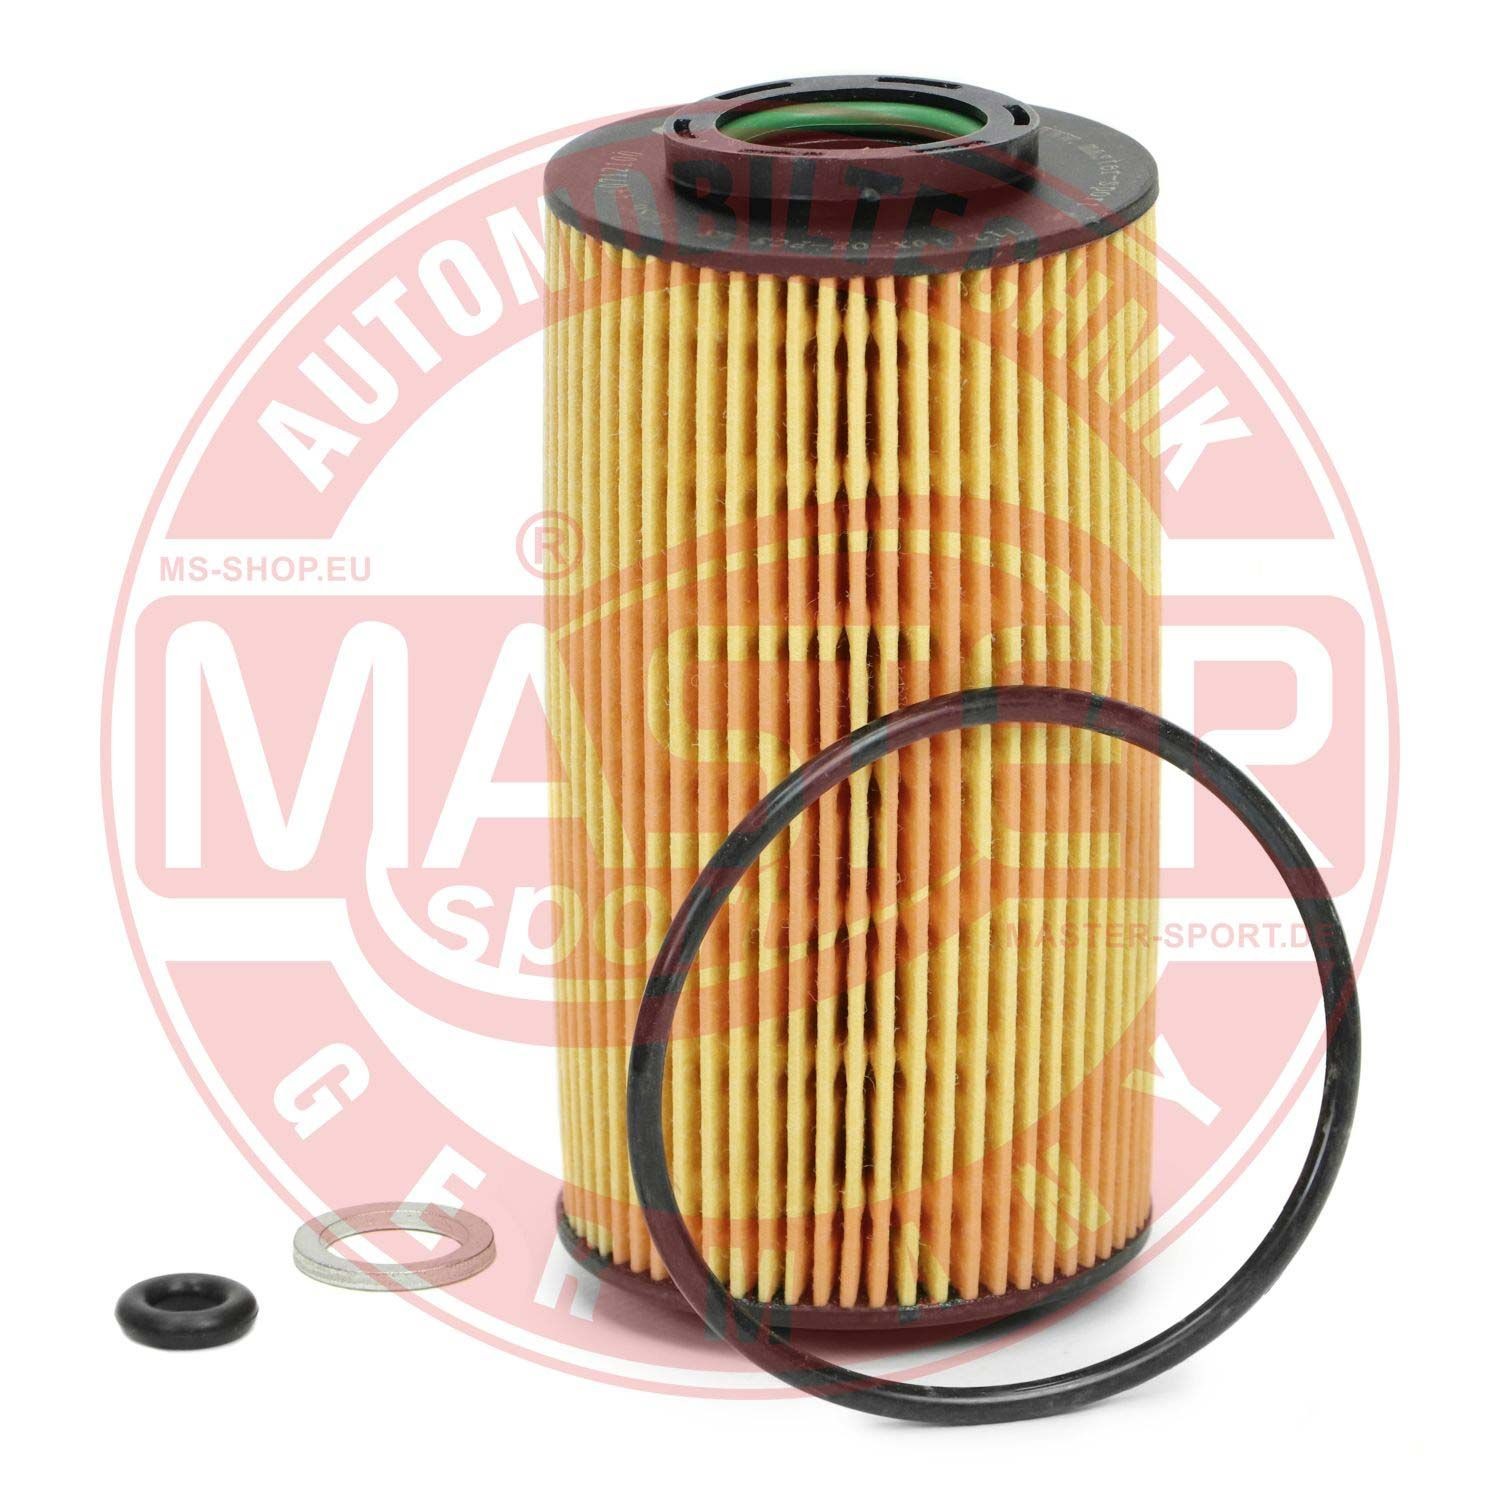 MASTER-SPORT 712/10X-OF-PCS-MS Oil filter KIA experience and price